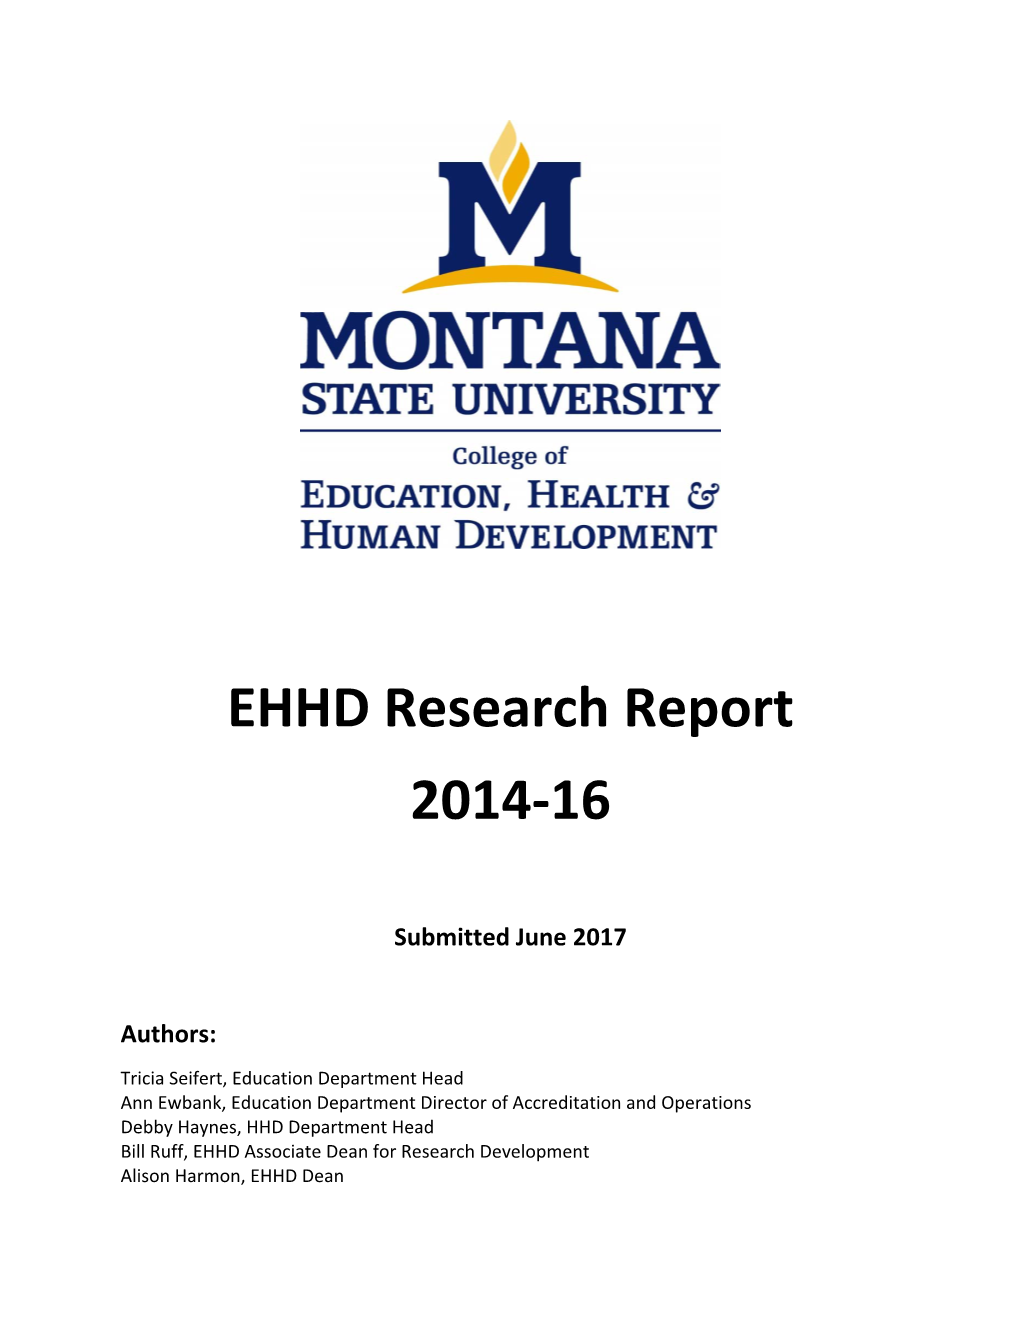 EHHD Research Report 2014-16